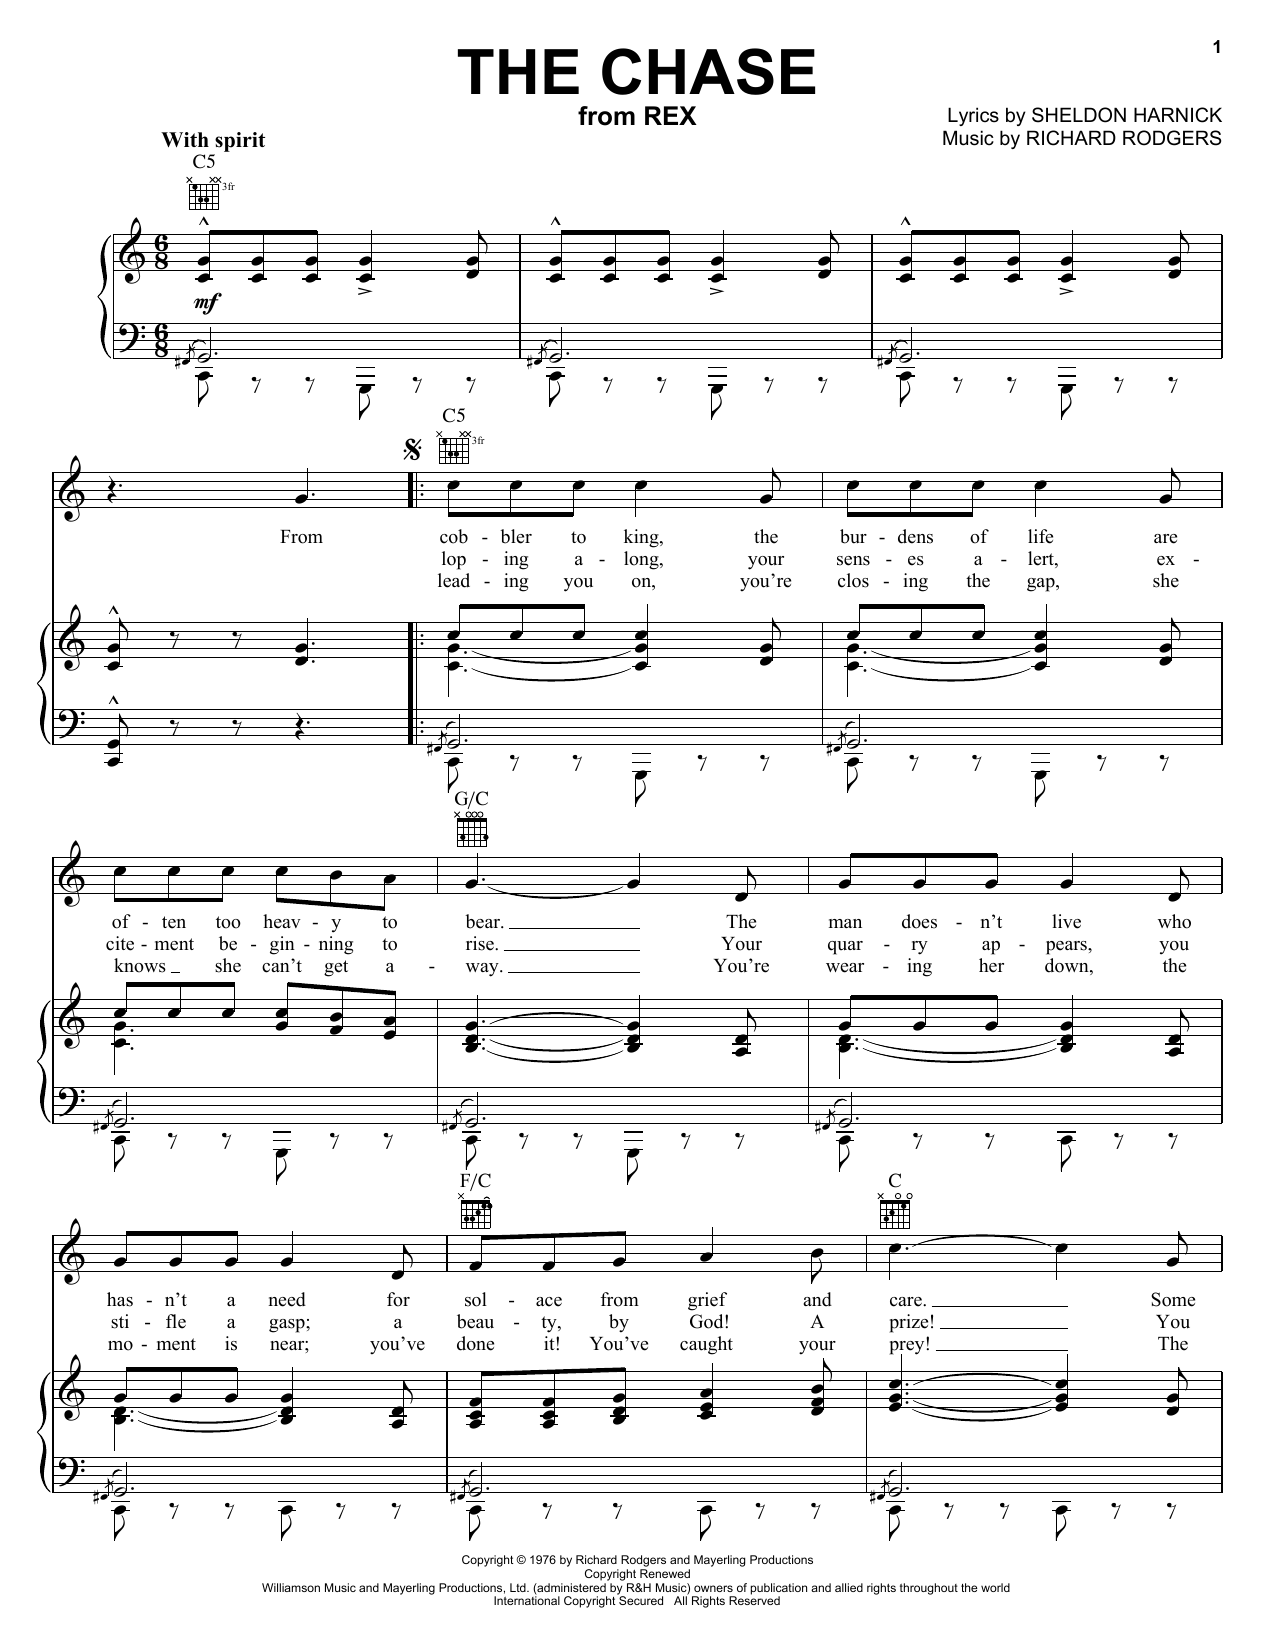 Download Richard Rodgers The Chase Sheet Music